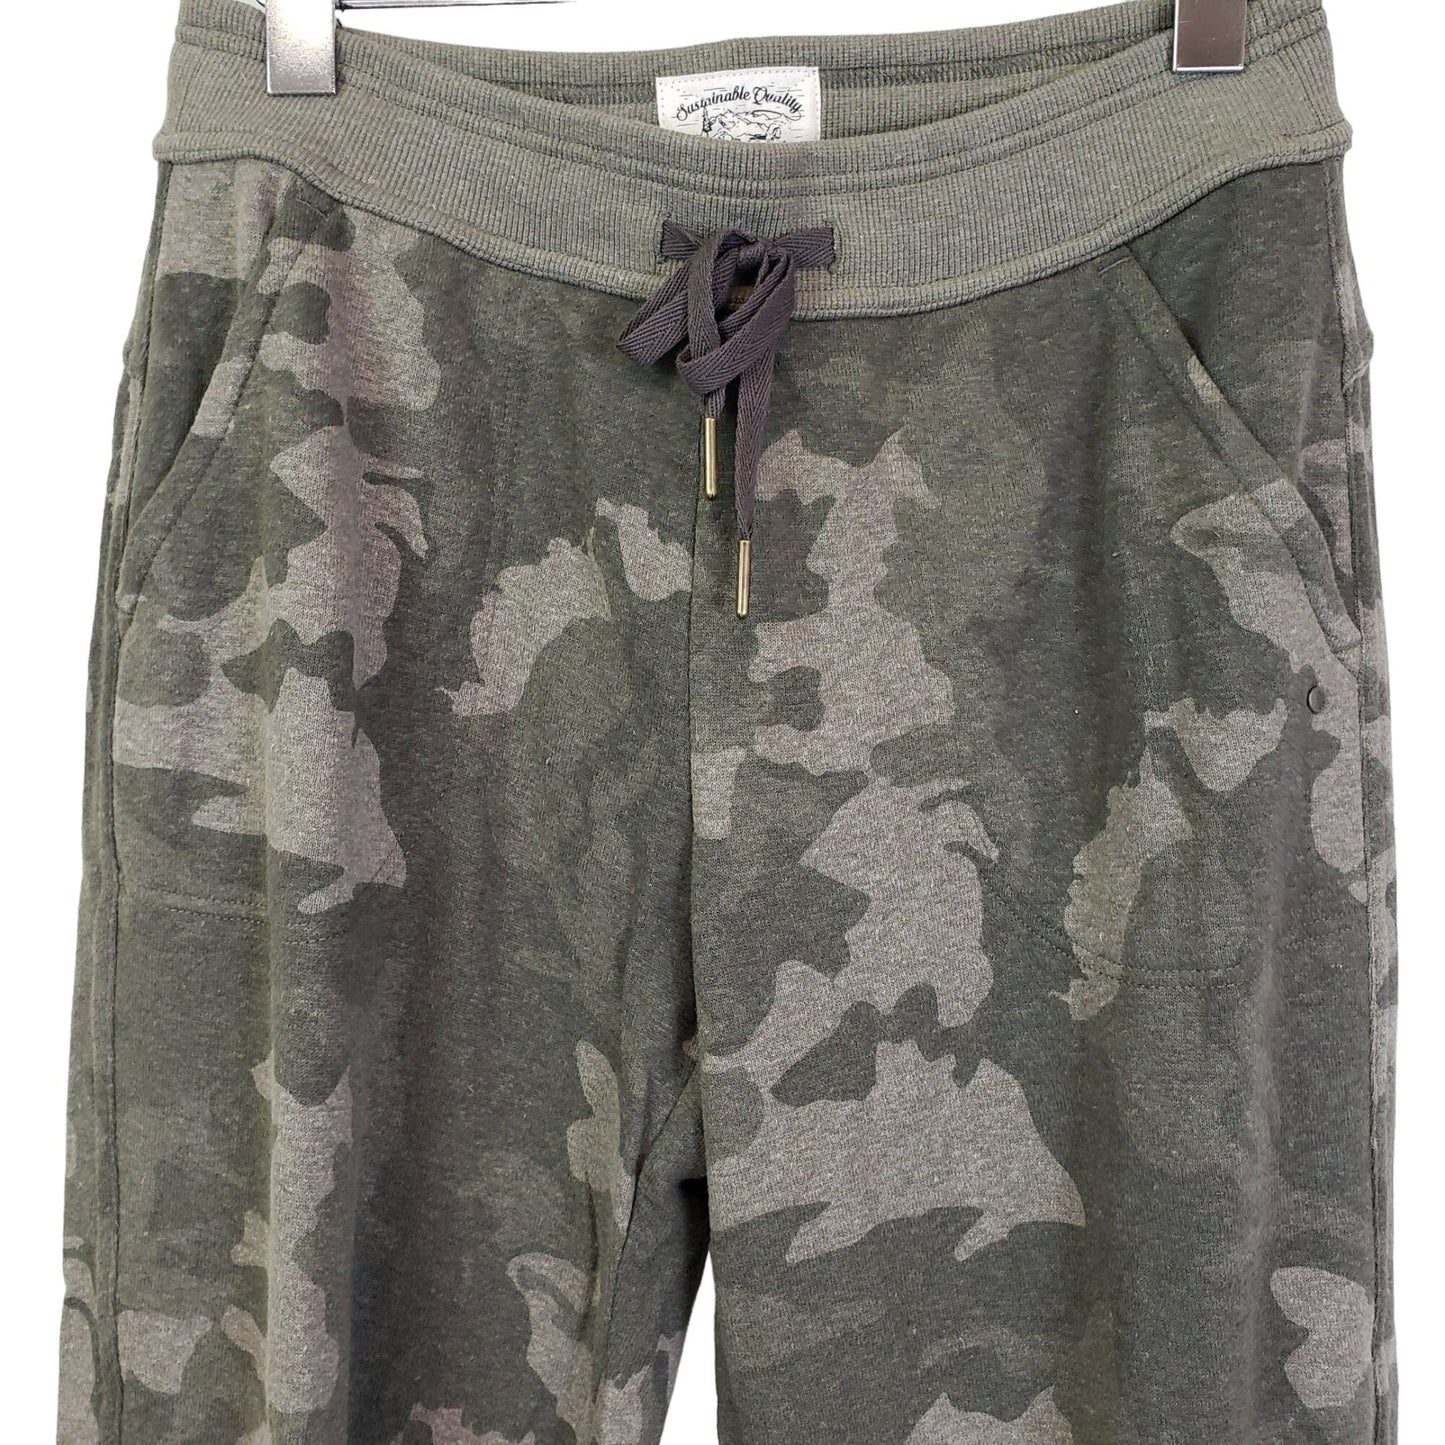 NWT Prana Cozy Up Ankle Pant in Sage Camo Size Small (3)